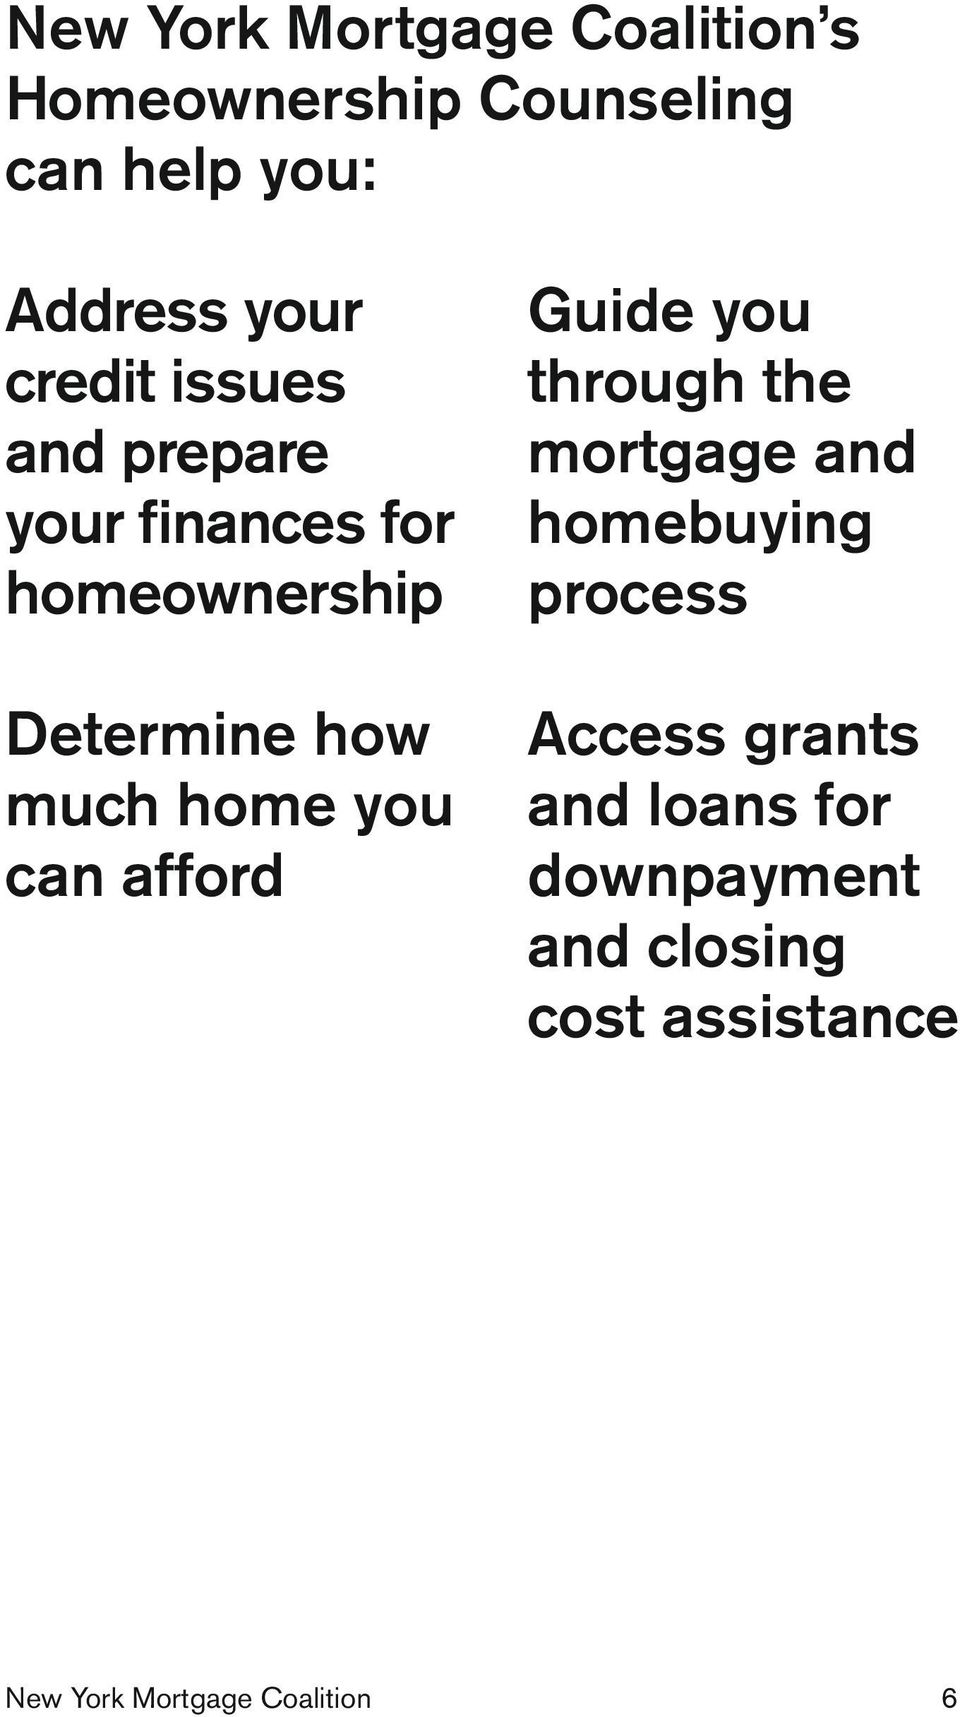 you can afford Guide you through the mortgage and homebuying process Access grants